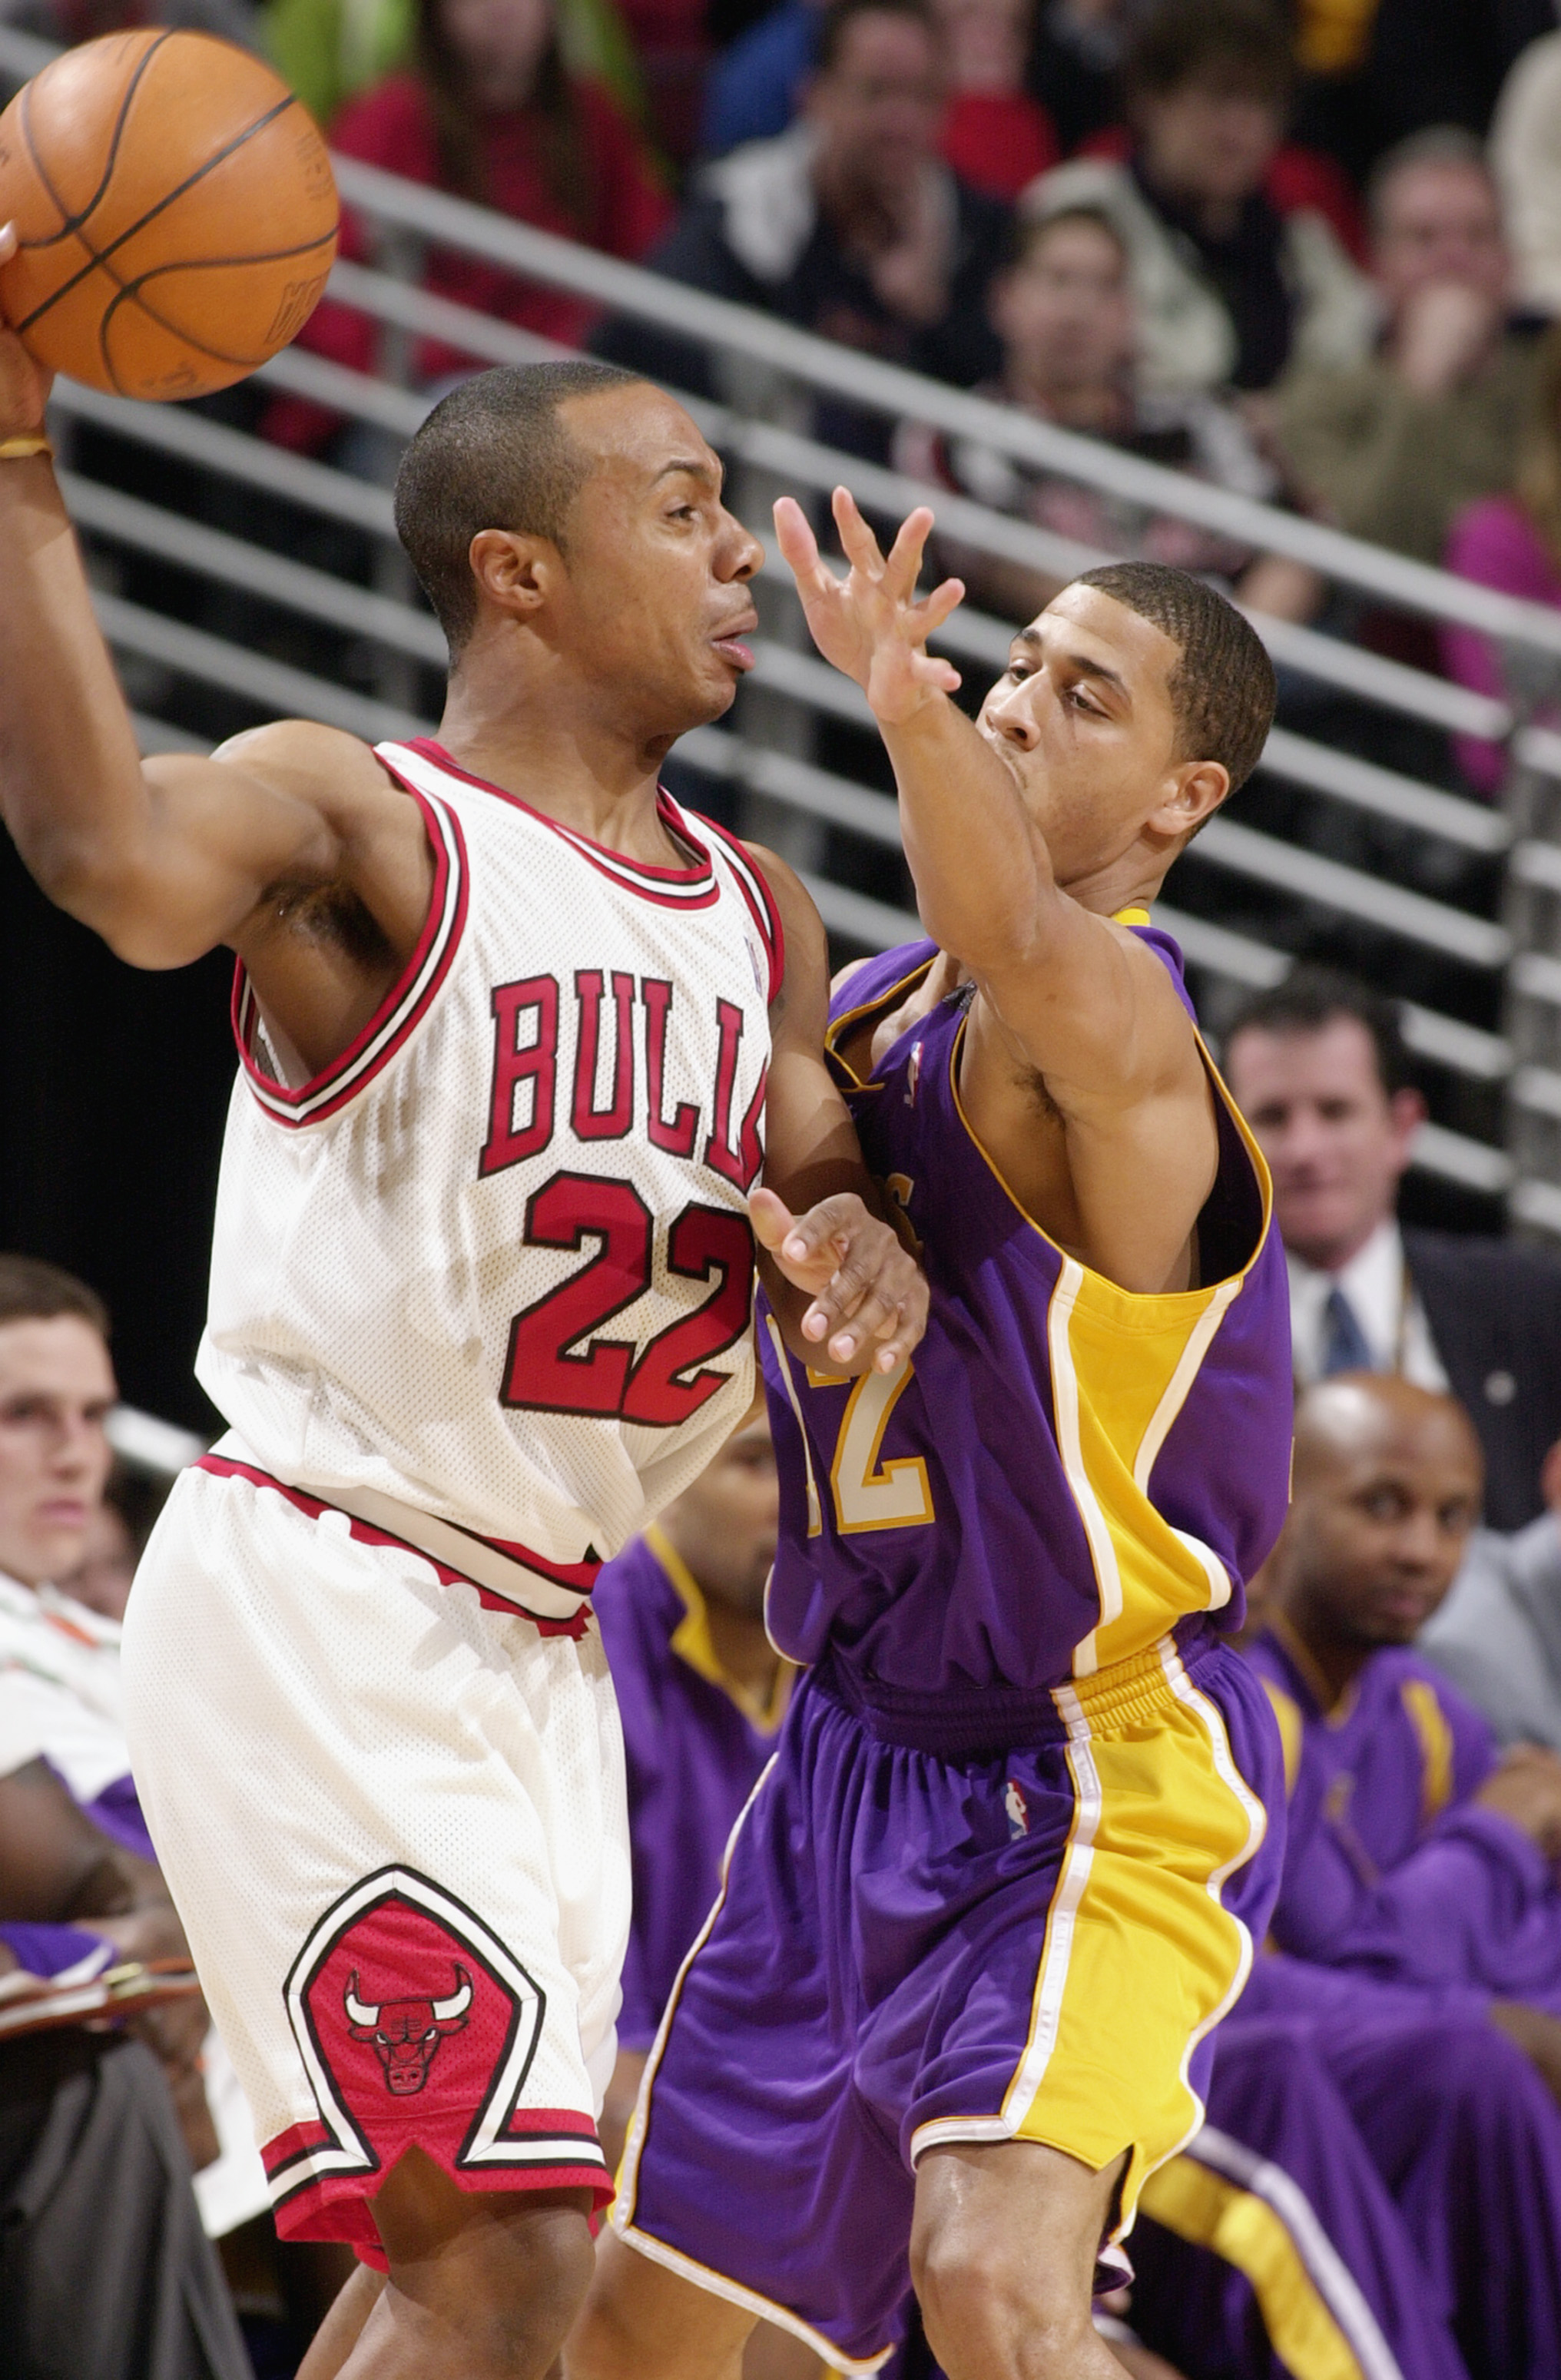 CHICAGO - MARCH 11:  Jay Williams #22 of the Chicago Bulls attempts to pass around Jannero Pargo #12 of the Los Angeles Lakers during the game at the United Center on March 11, 2003 in Chicago, Illinois.  The Bulls won 116-99.  NOTE TO USER: User expressl